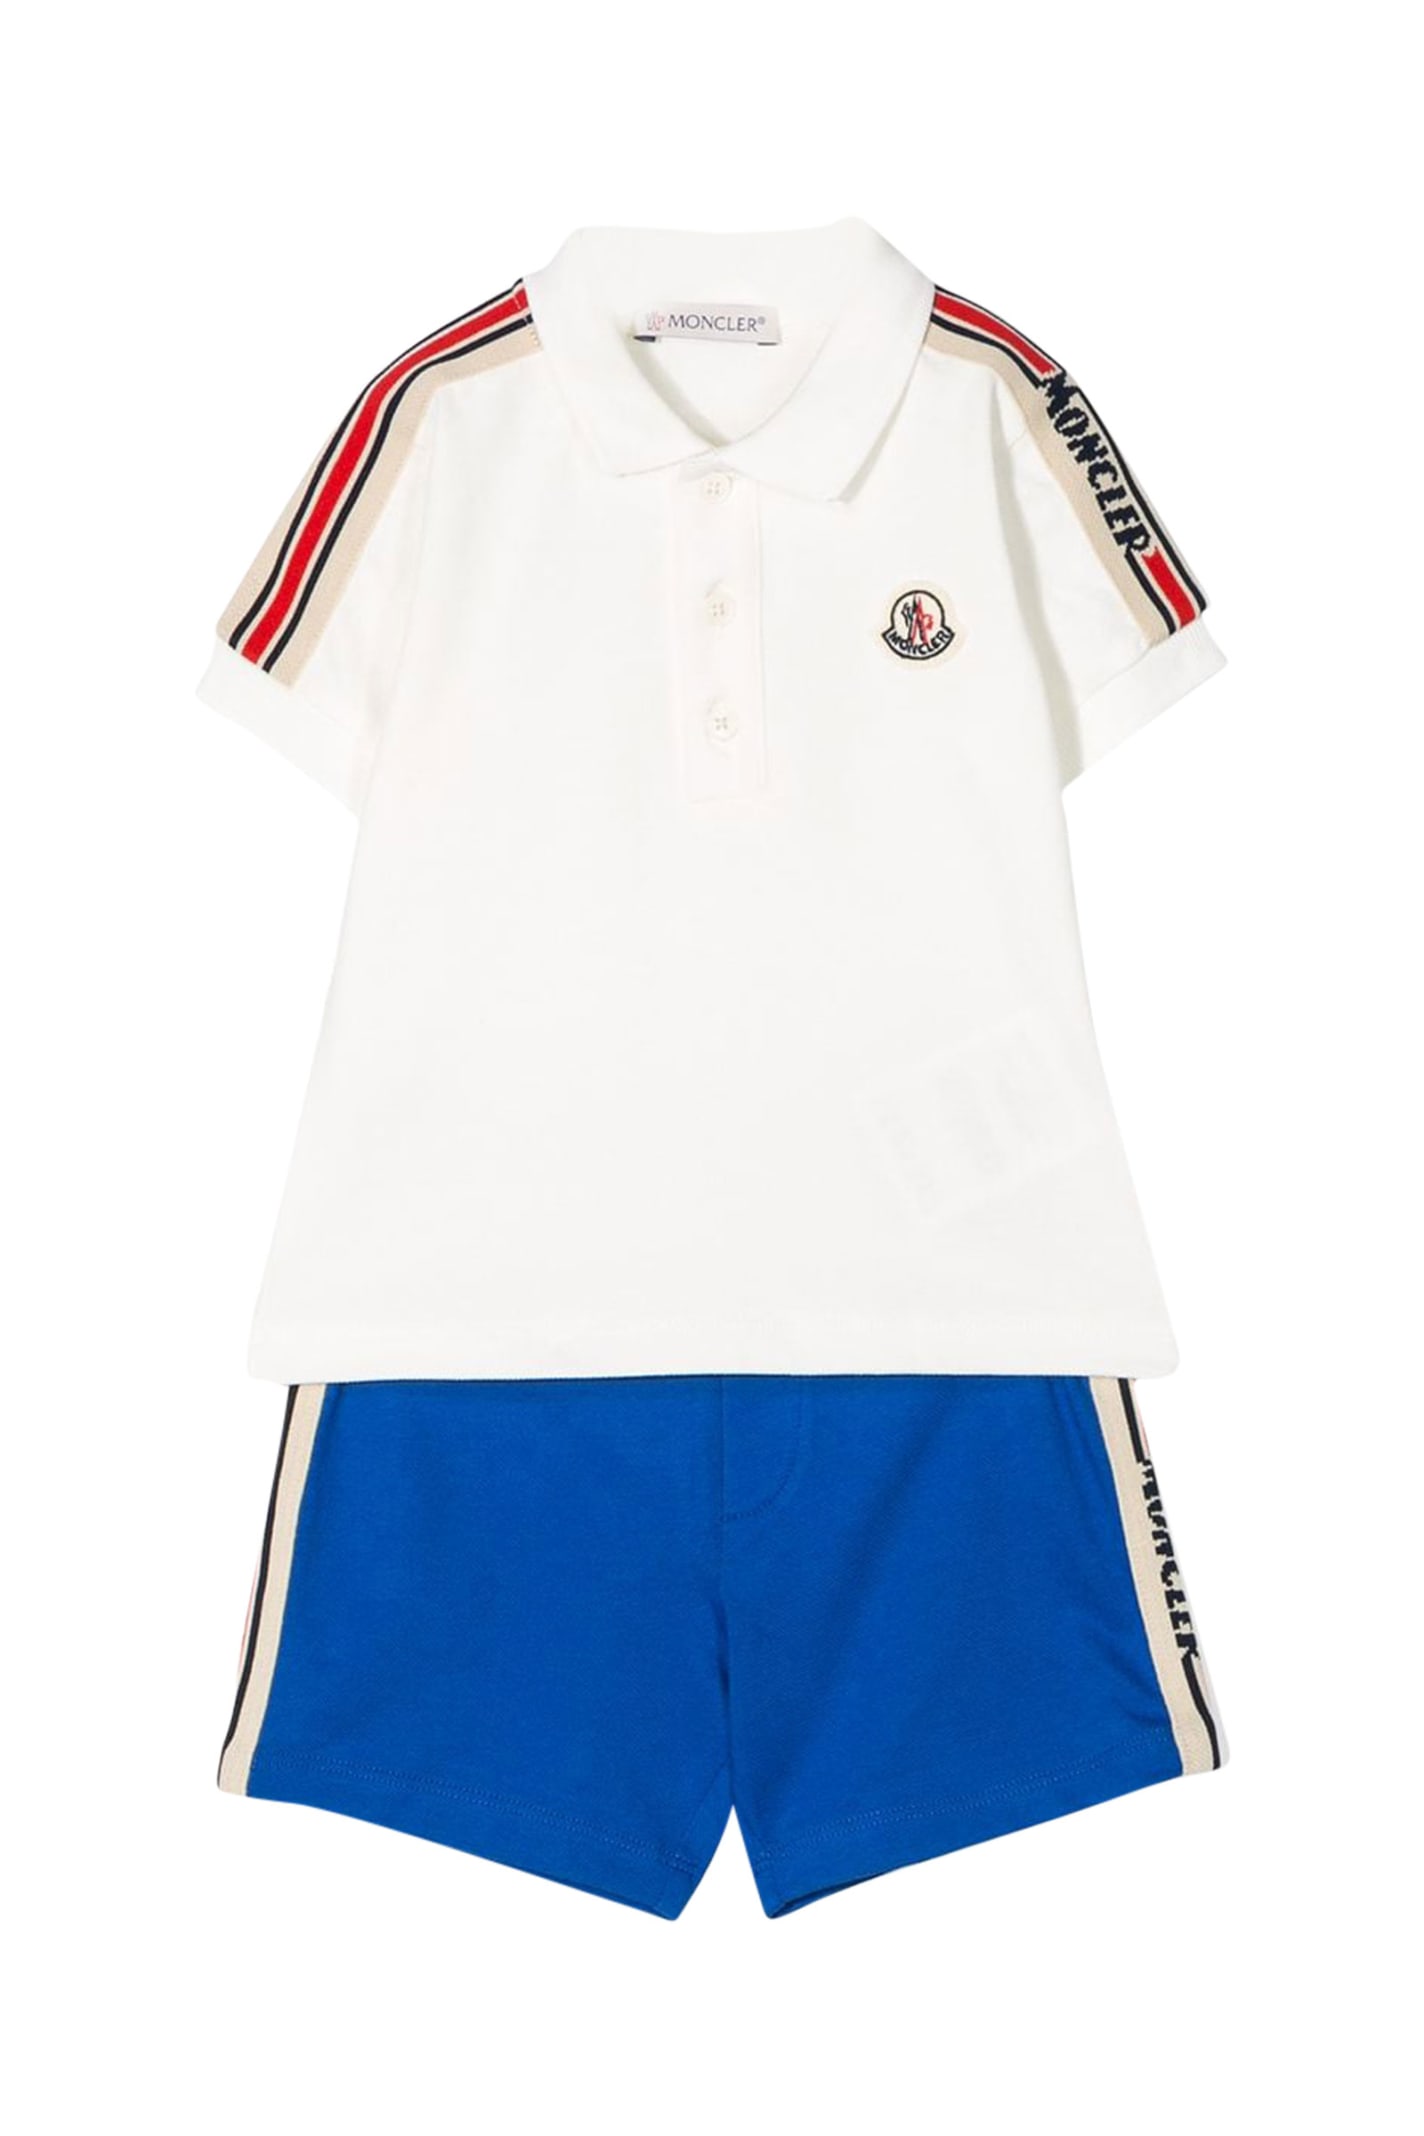 Moncler Babies' Striped Top And Shorts 